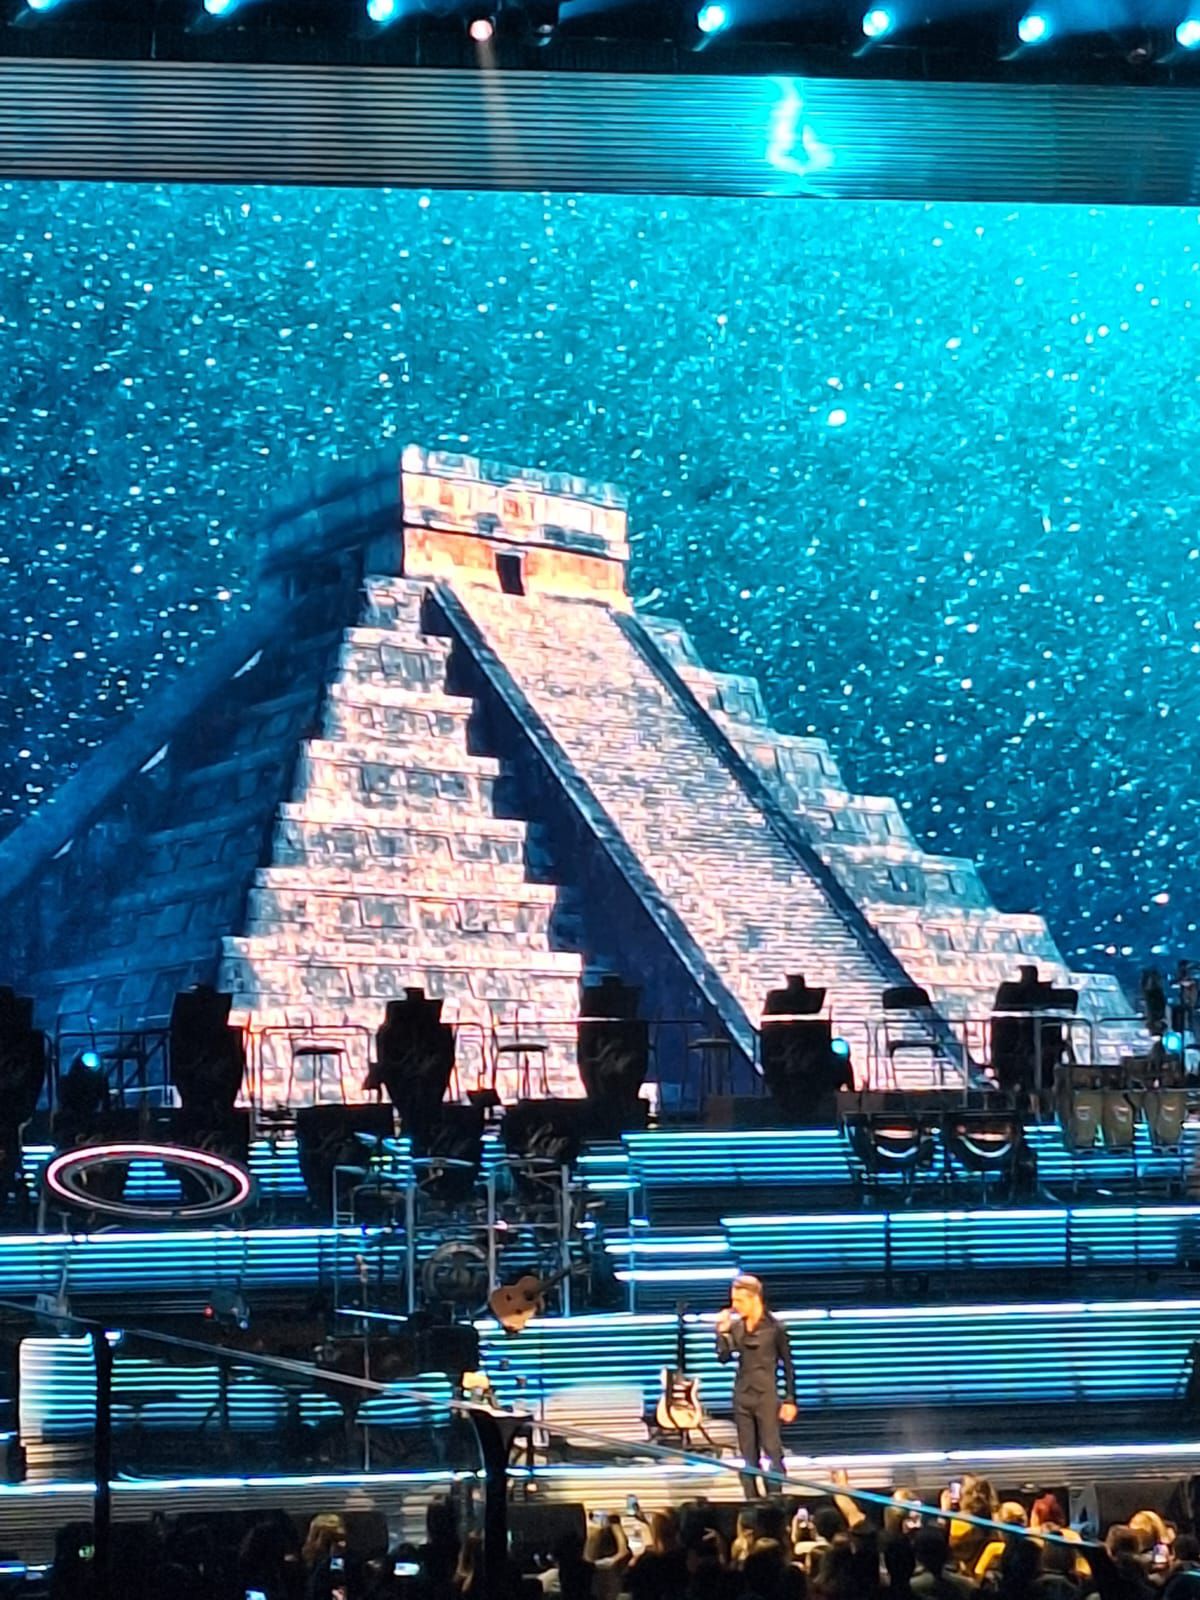 For each of the musical segments, a different staging was prepared from the giant screen.